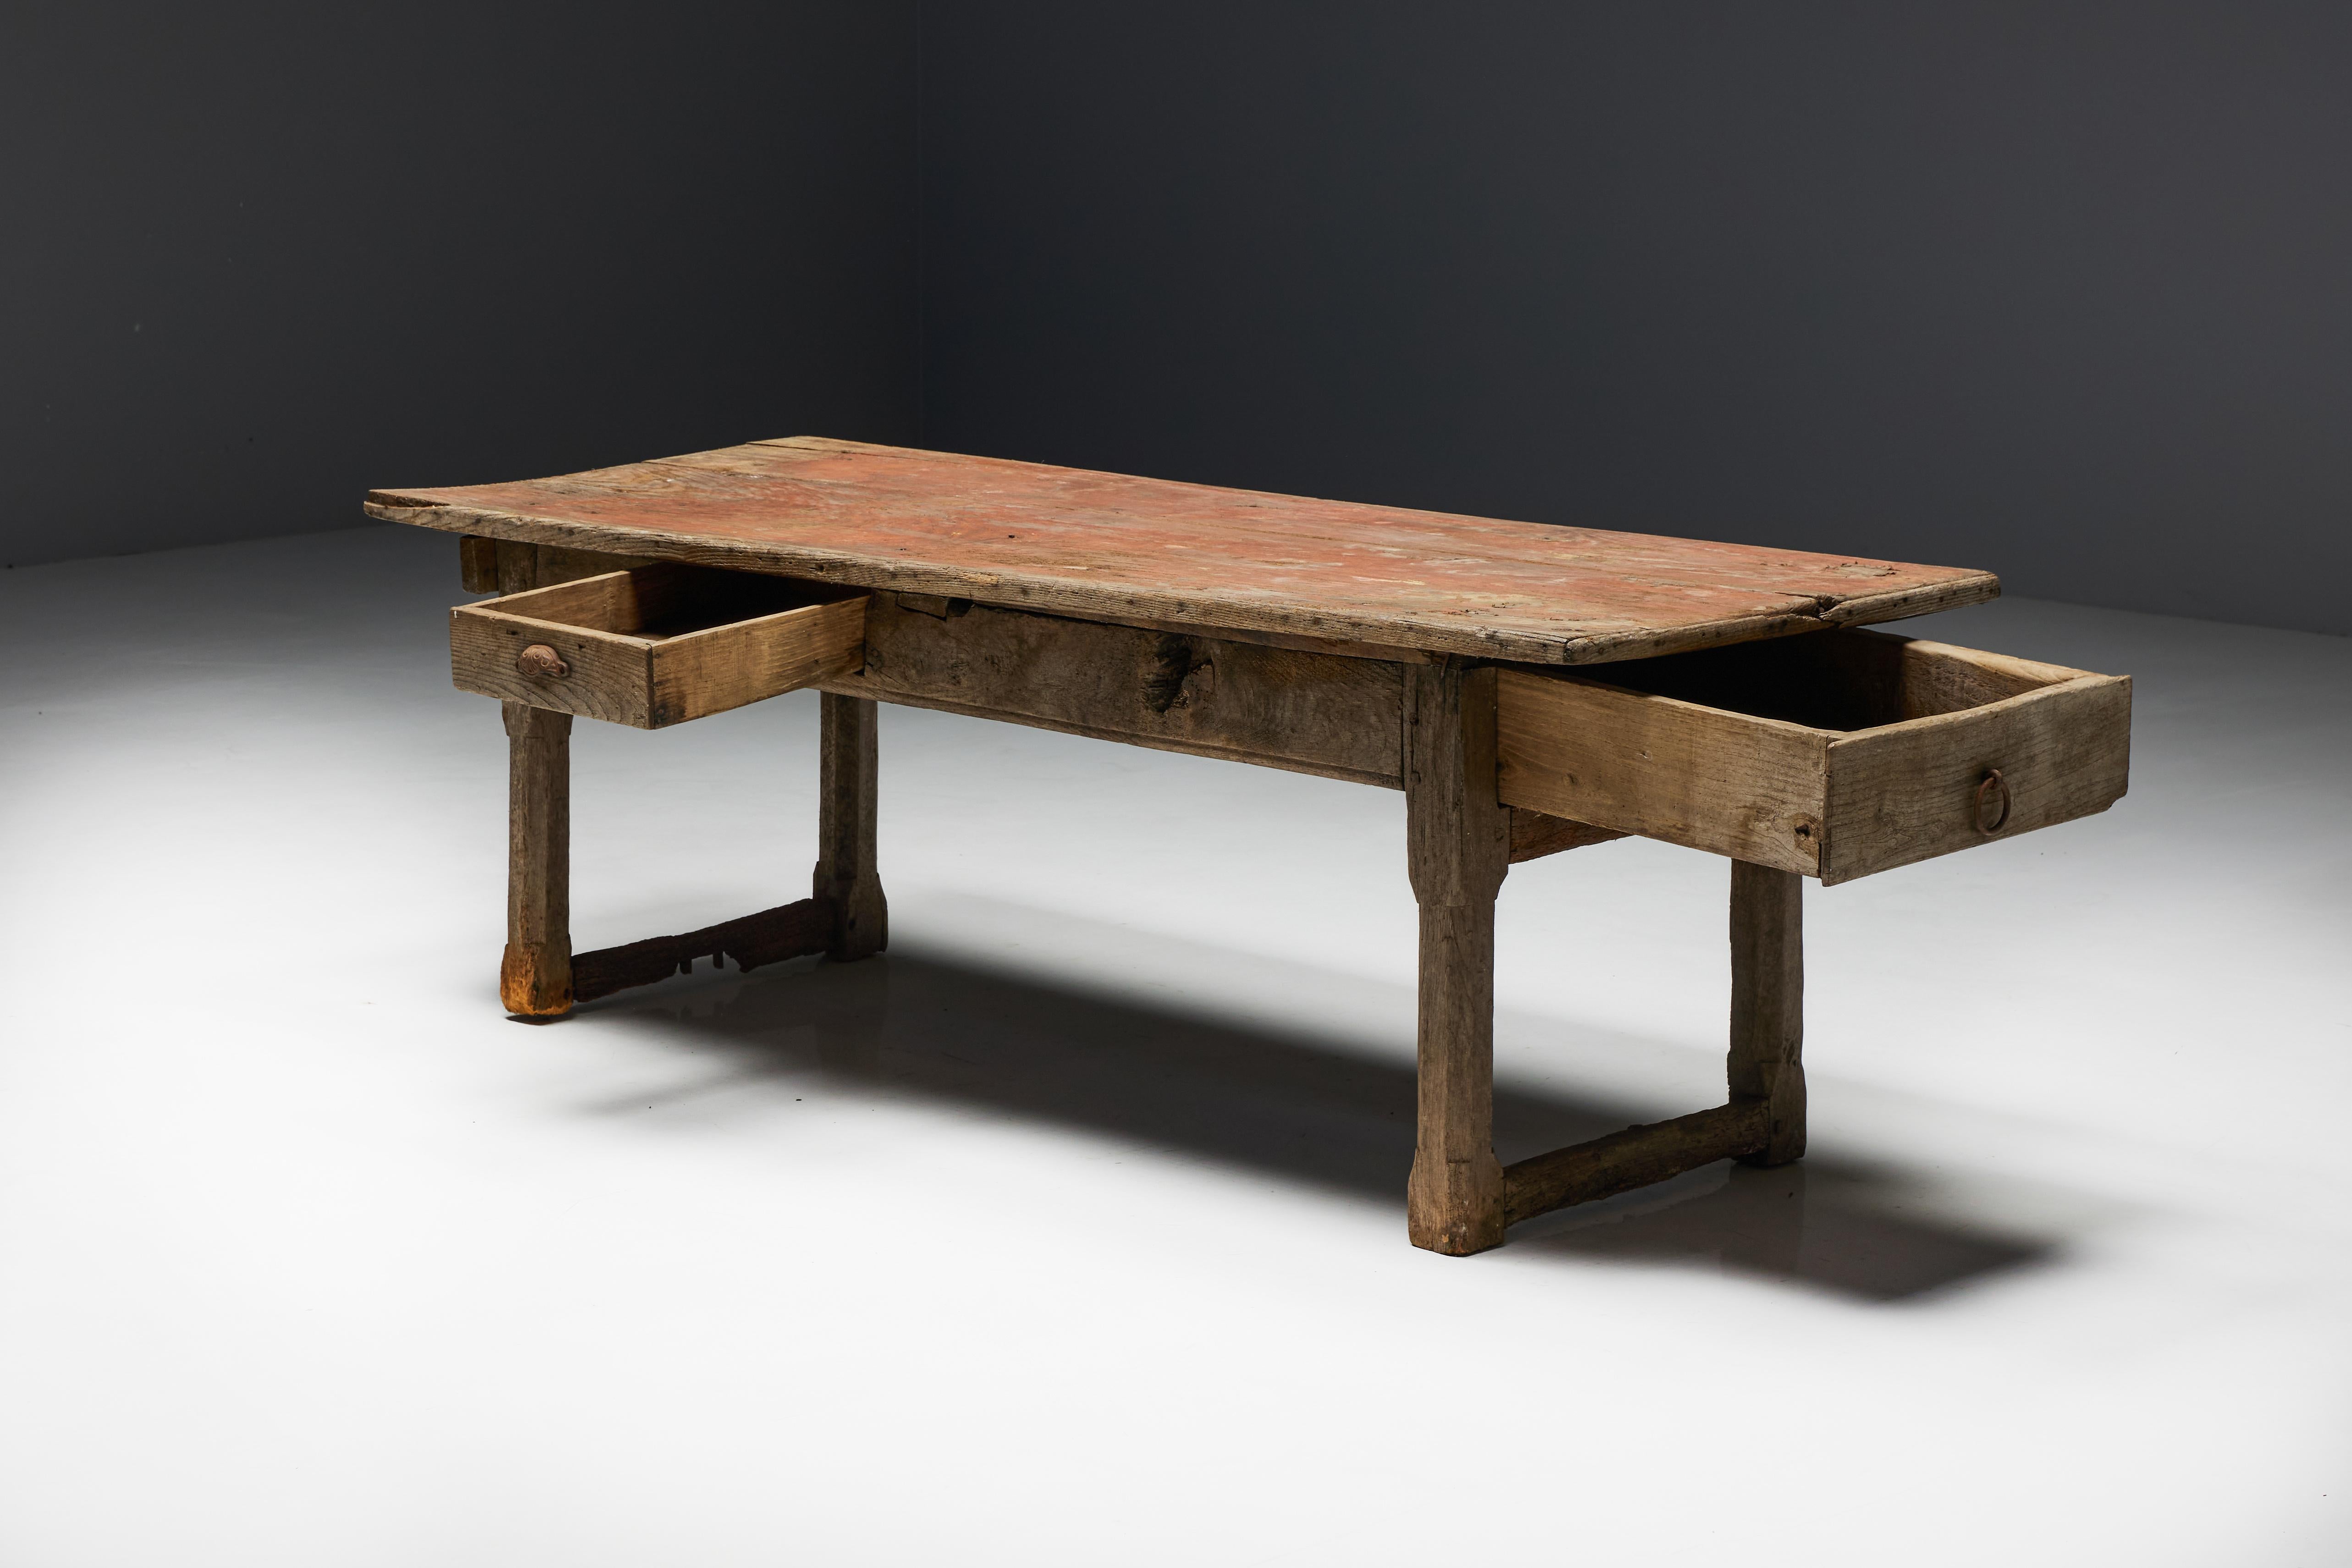 Rustic Travail Populaire Dining Table, France, Early 19th Century For Sale 1